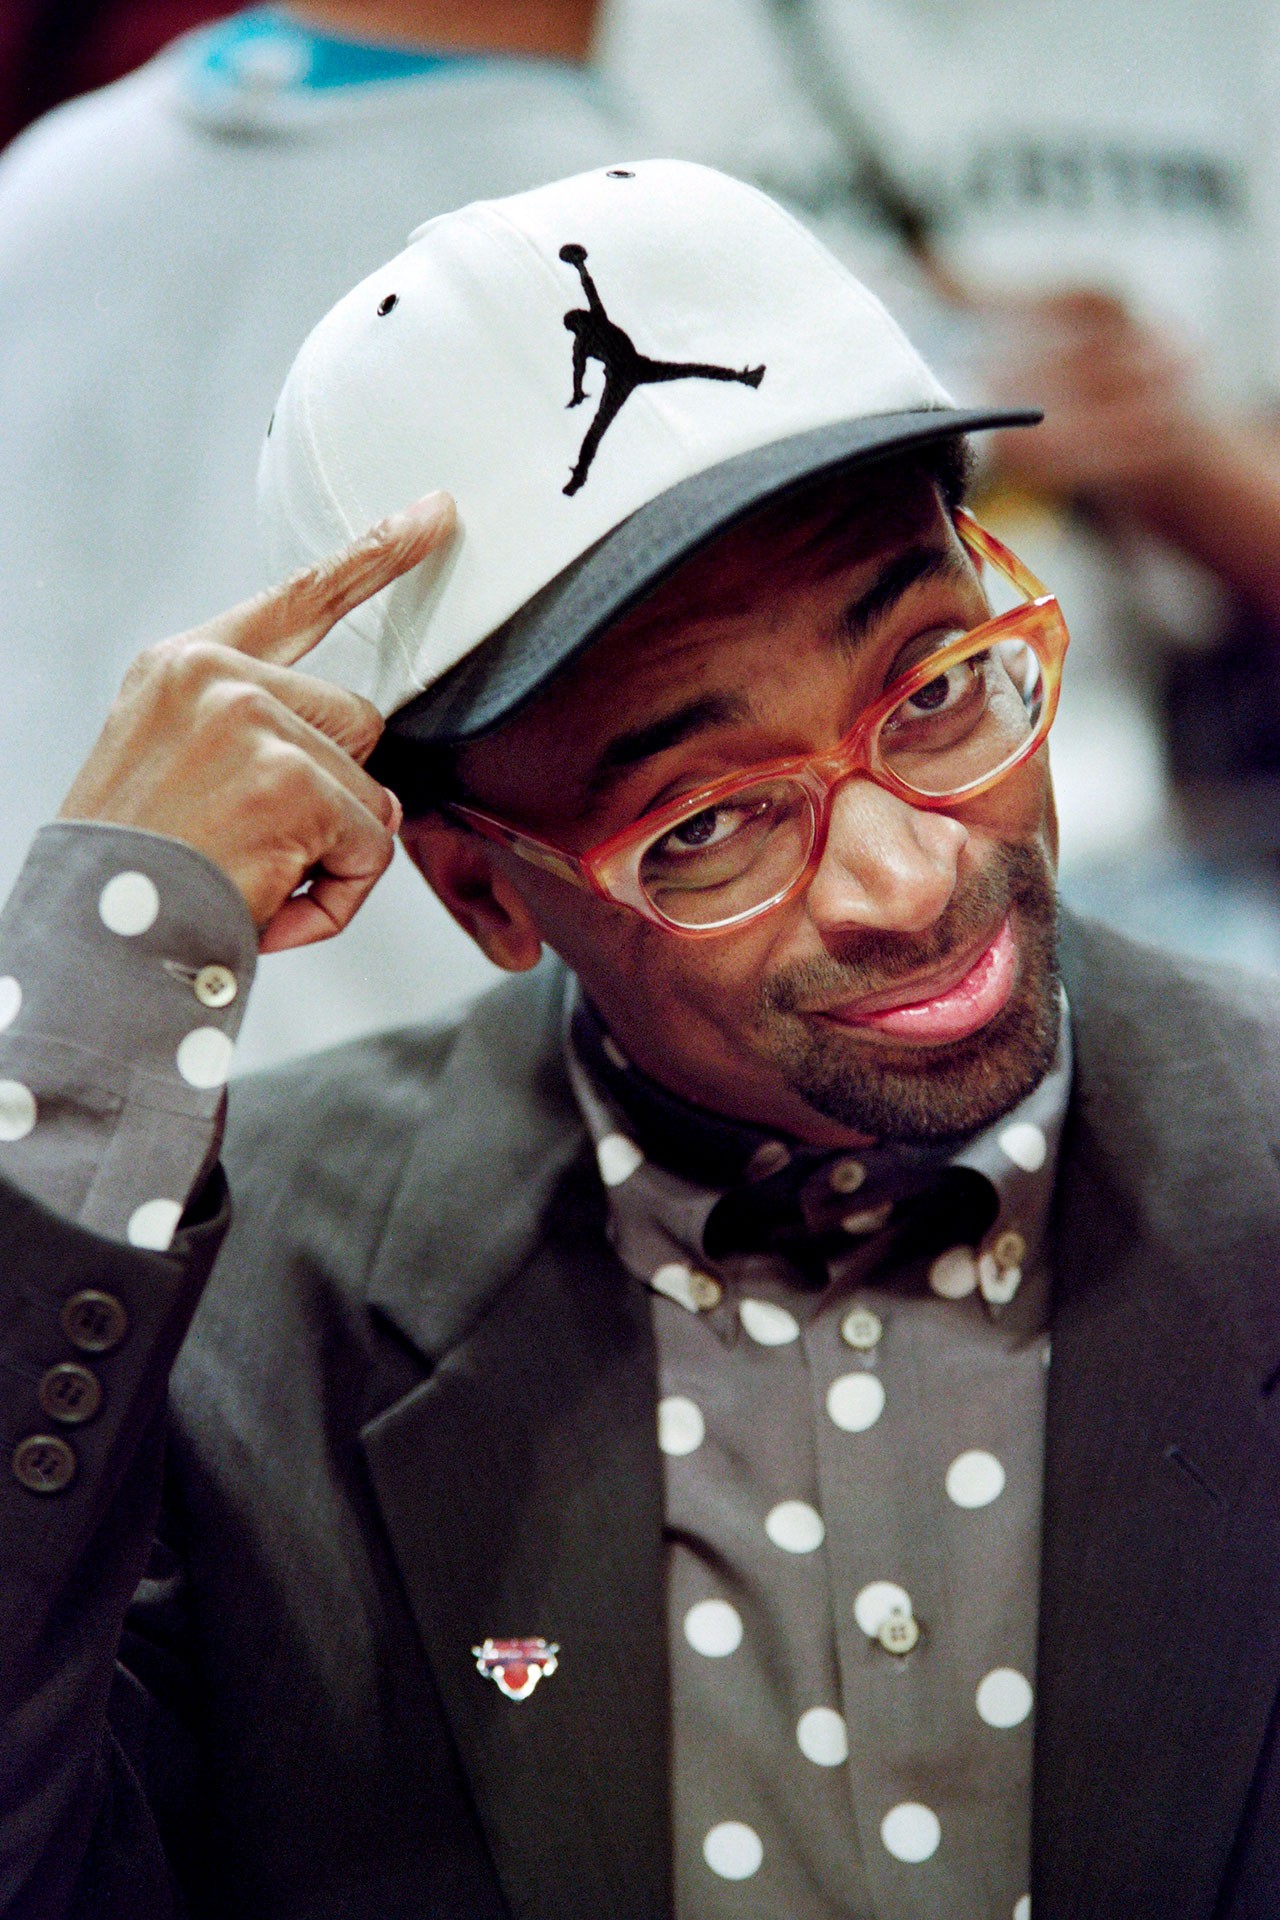 Spike Lee (Foto: Getty Images)